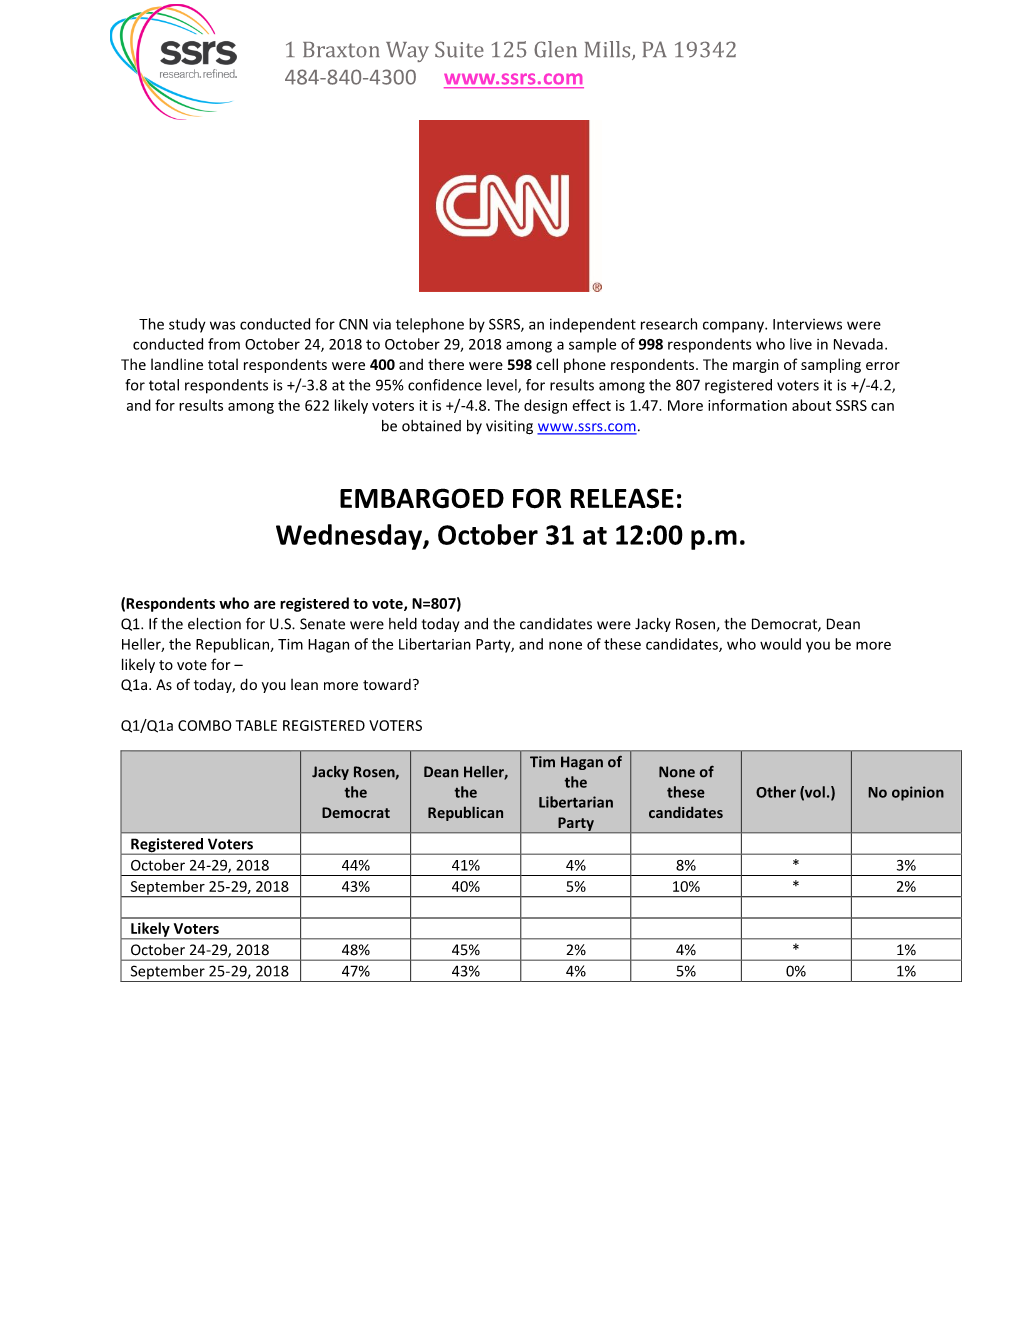 CNN/SSRS STATE (NEVADA) Poll -- October 24, 2018 to October 29, 2018